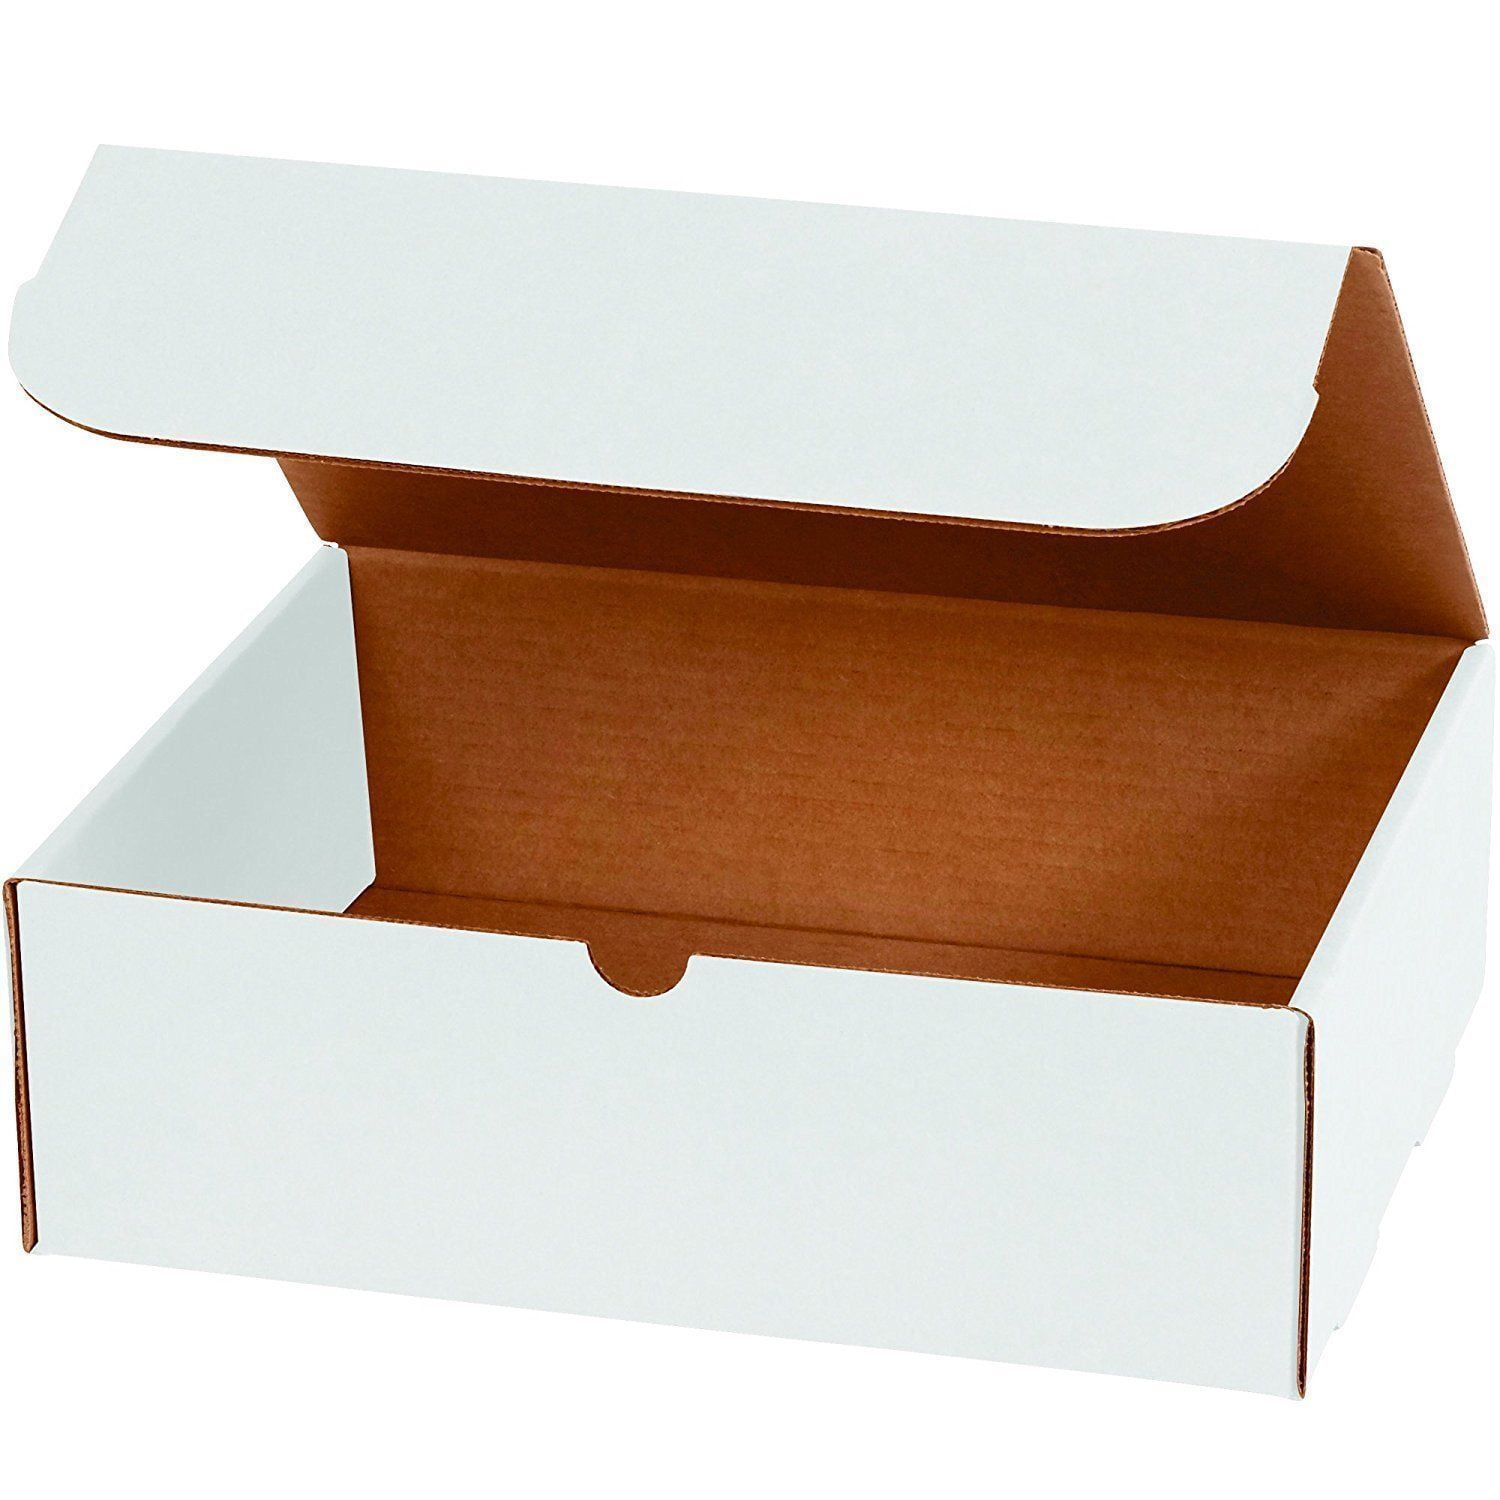 50-6 x 3 x 3" Corrugated Mailer Ships Flat and Fold Together in Seconds 